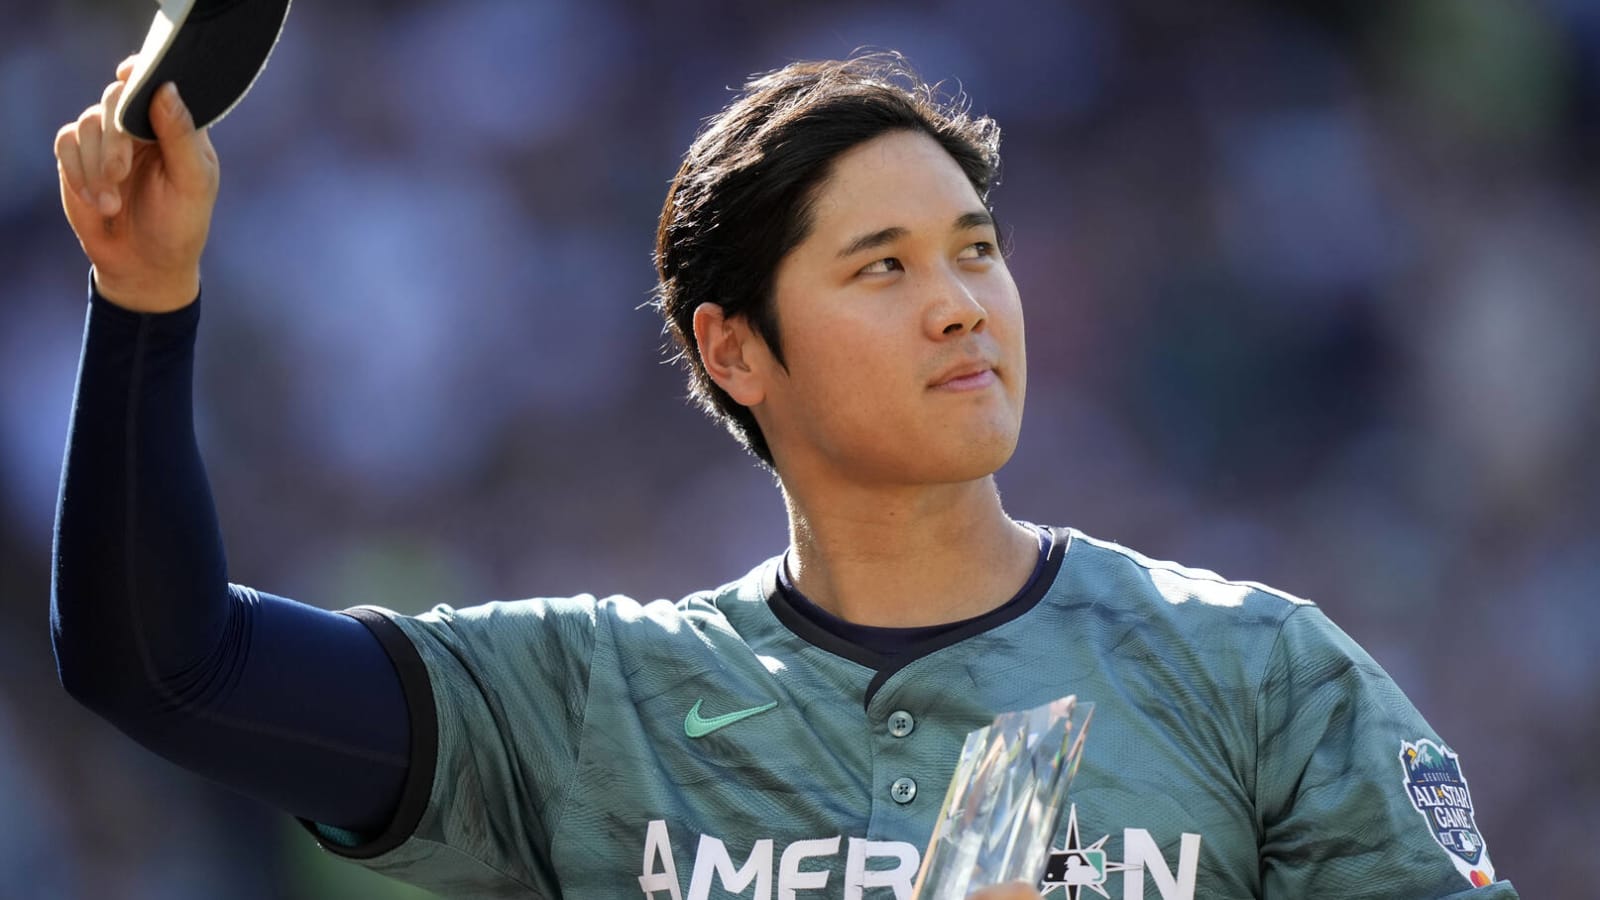 Mariners fans try to recruit Shohei Ohtani during AS Game | Yardbarker